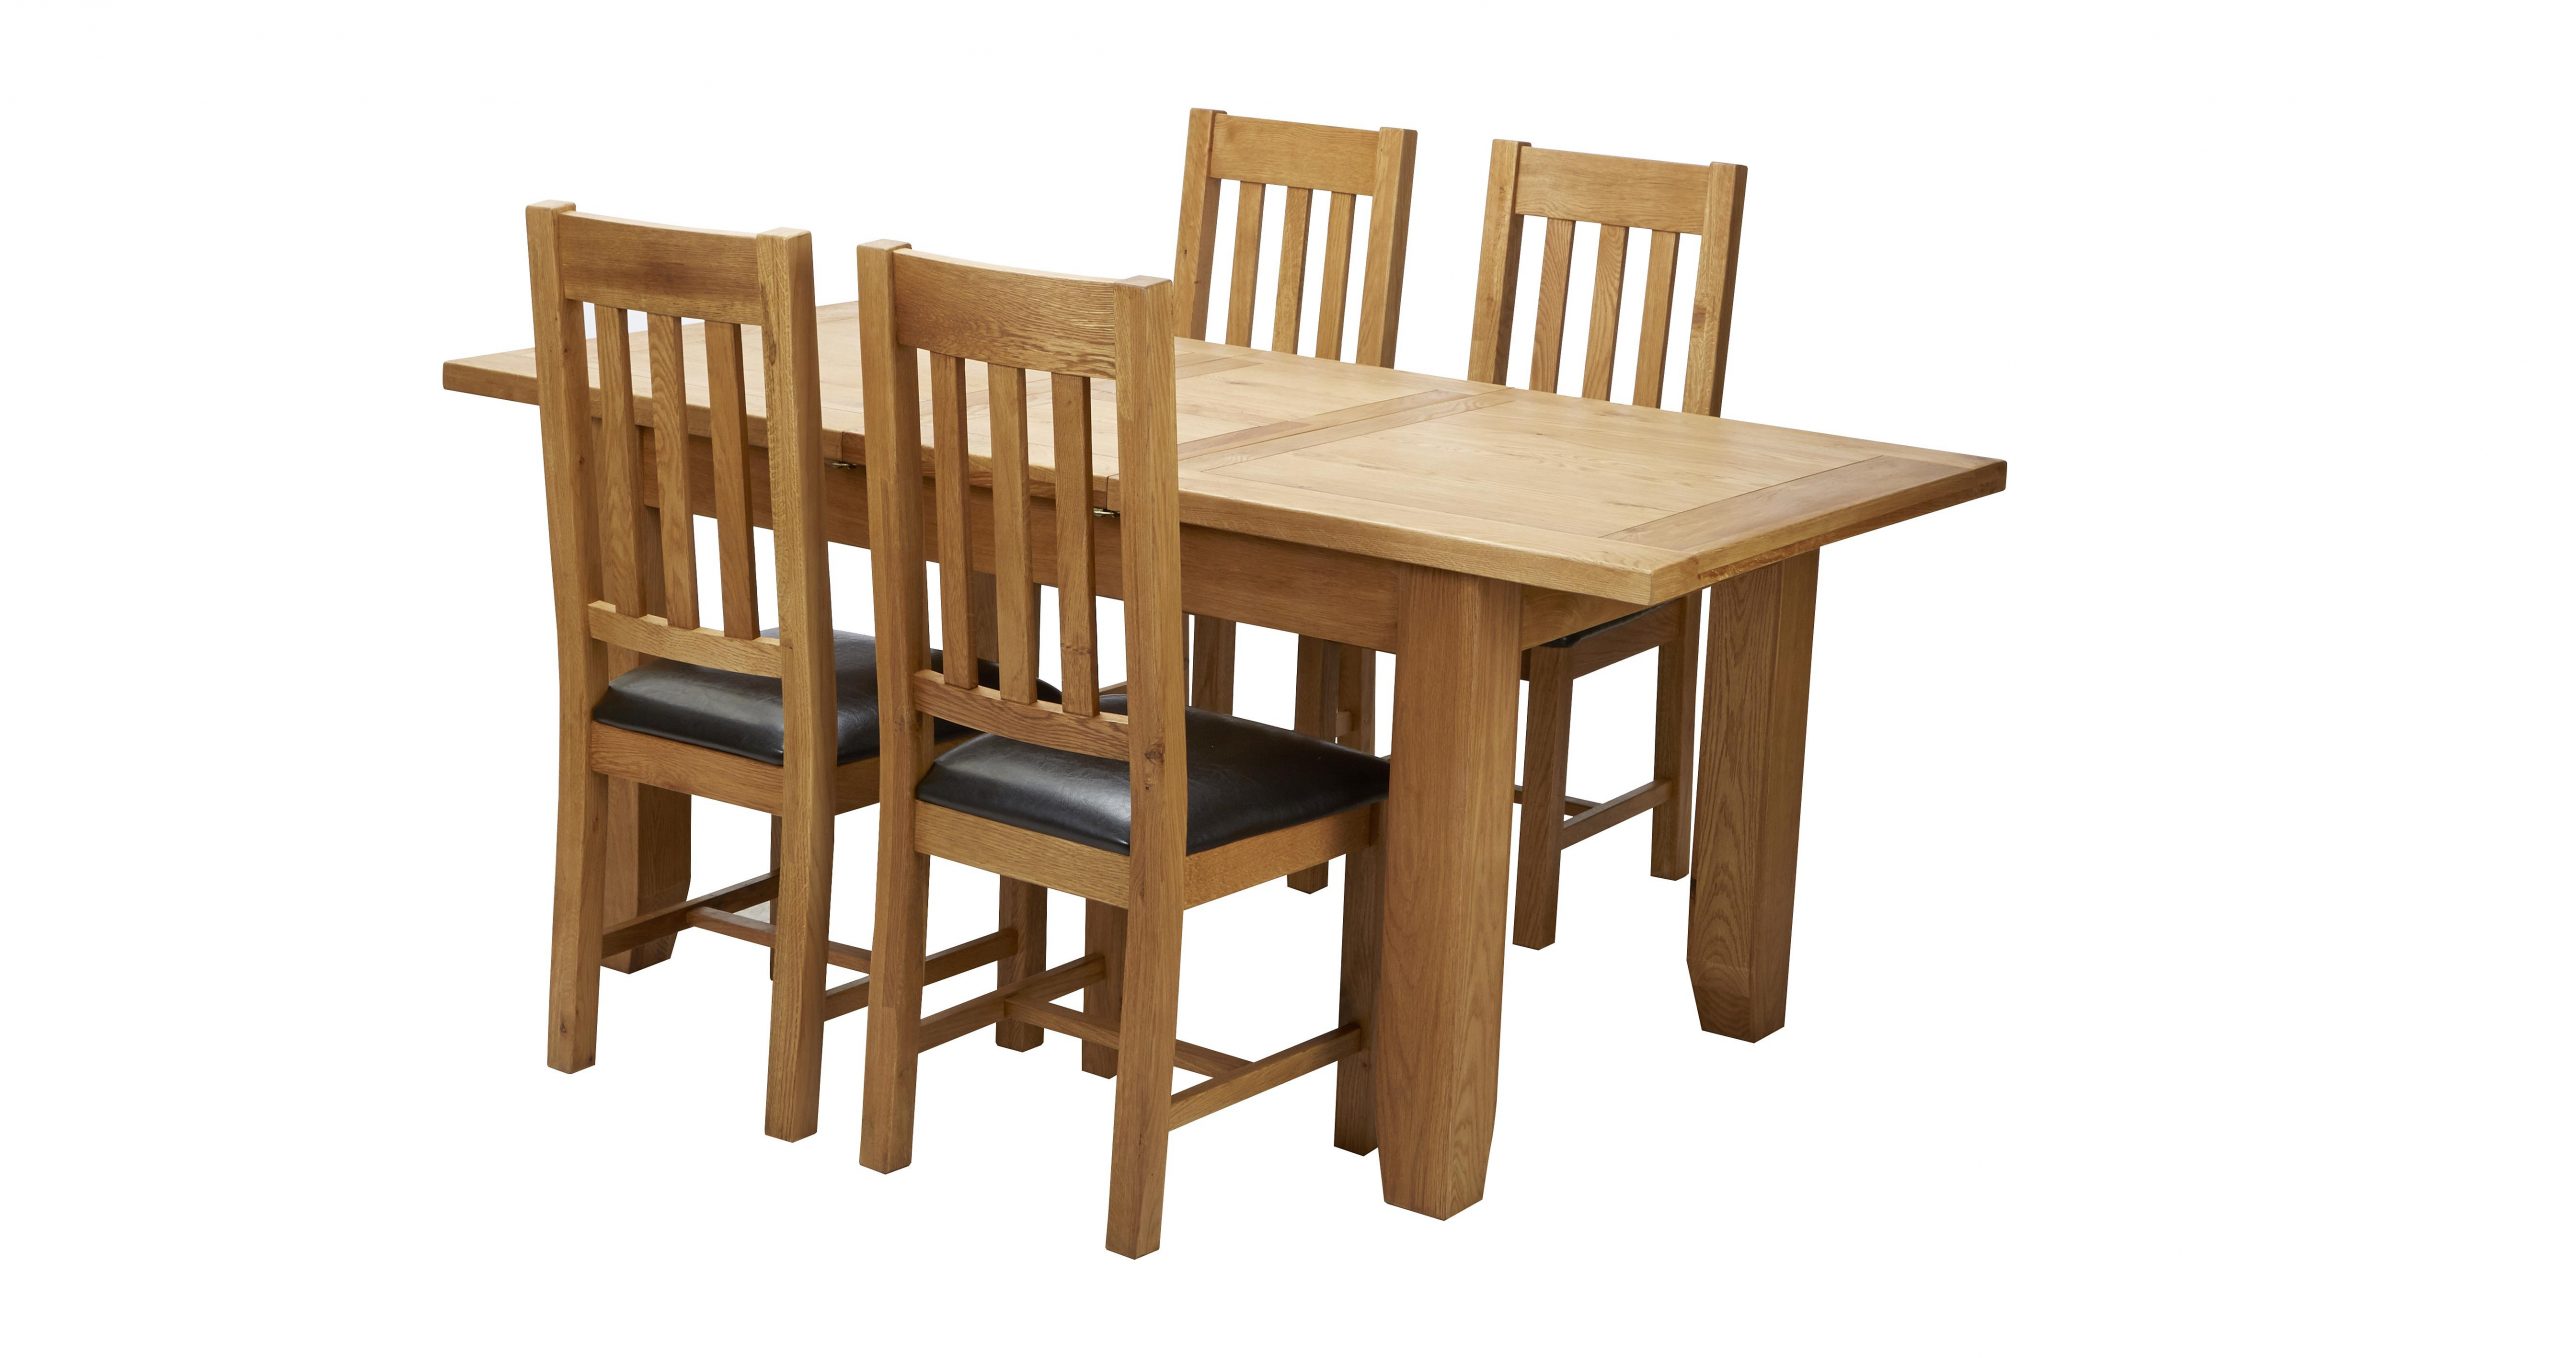 Chair 37 Amazing Extending Table And Chairs regarding sizing 5343 X 2835